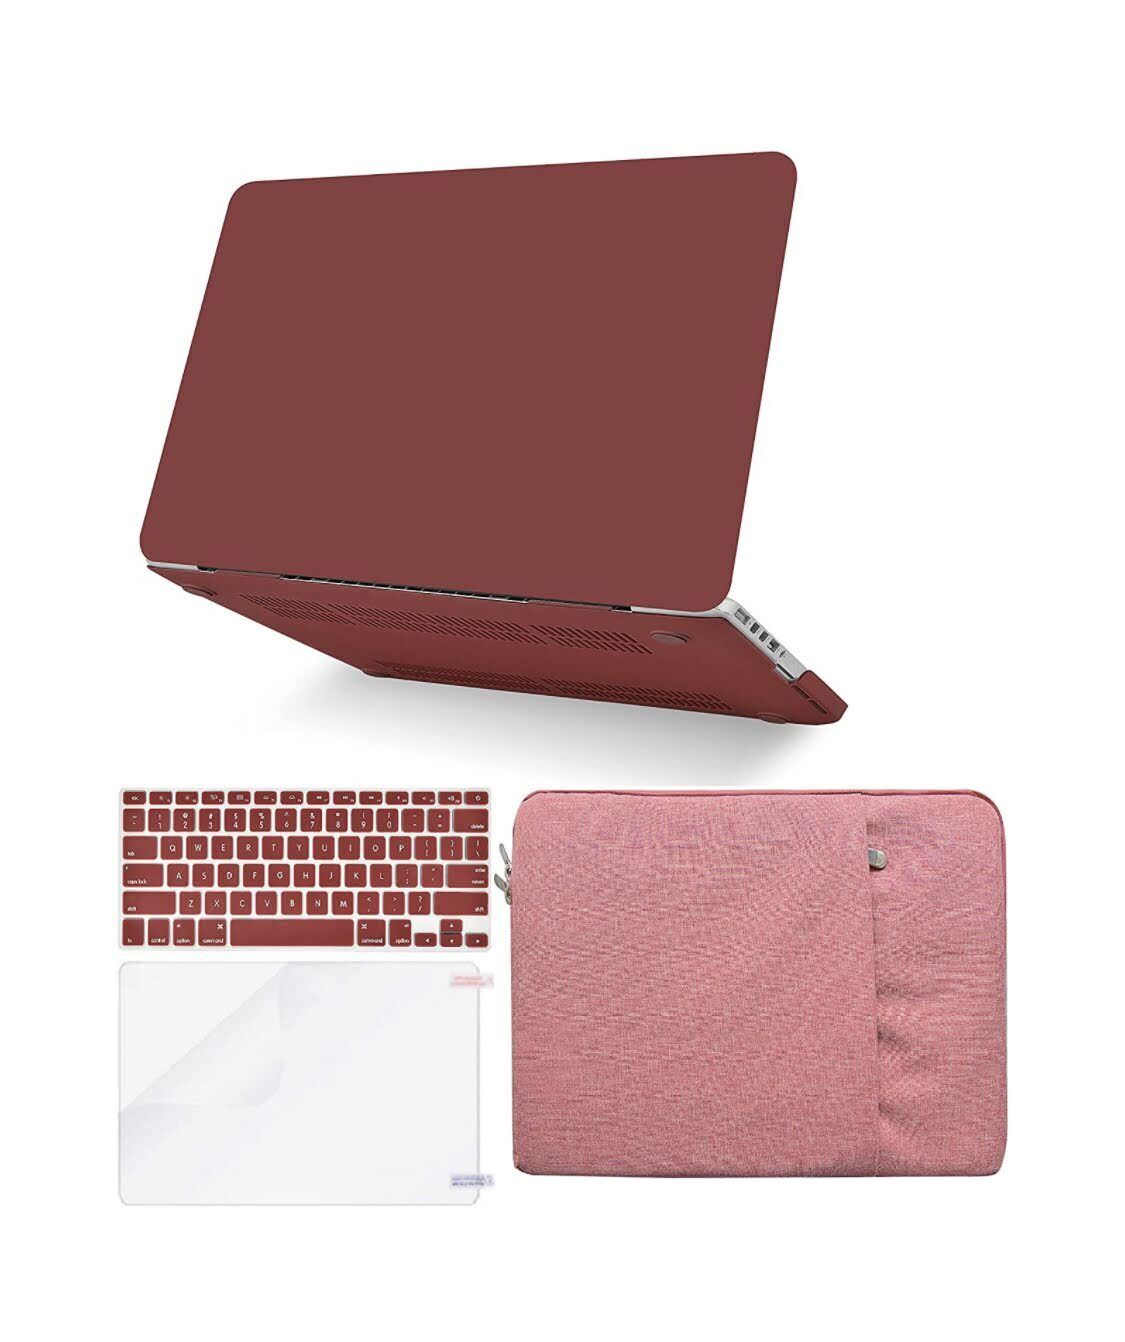 KECC Compatible w/ MacBook Air 13 A1369/A1466 Plastic Hard Shell Keyboard - Red